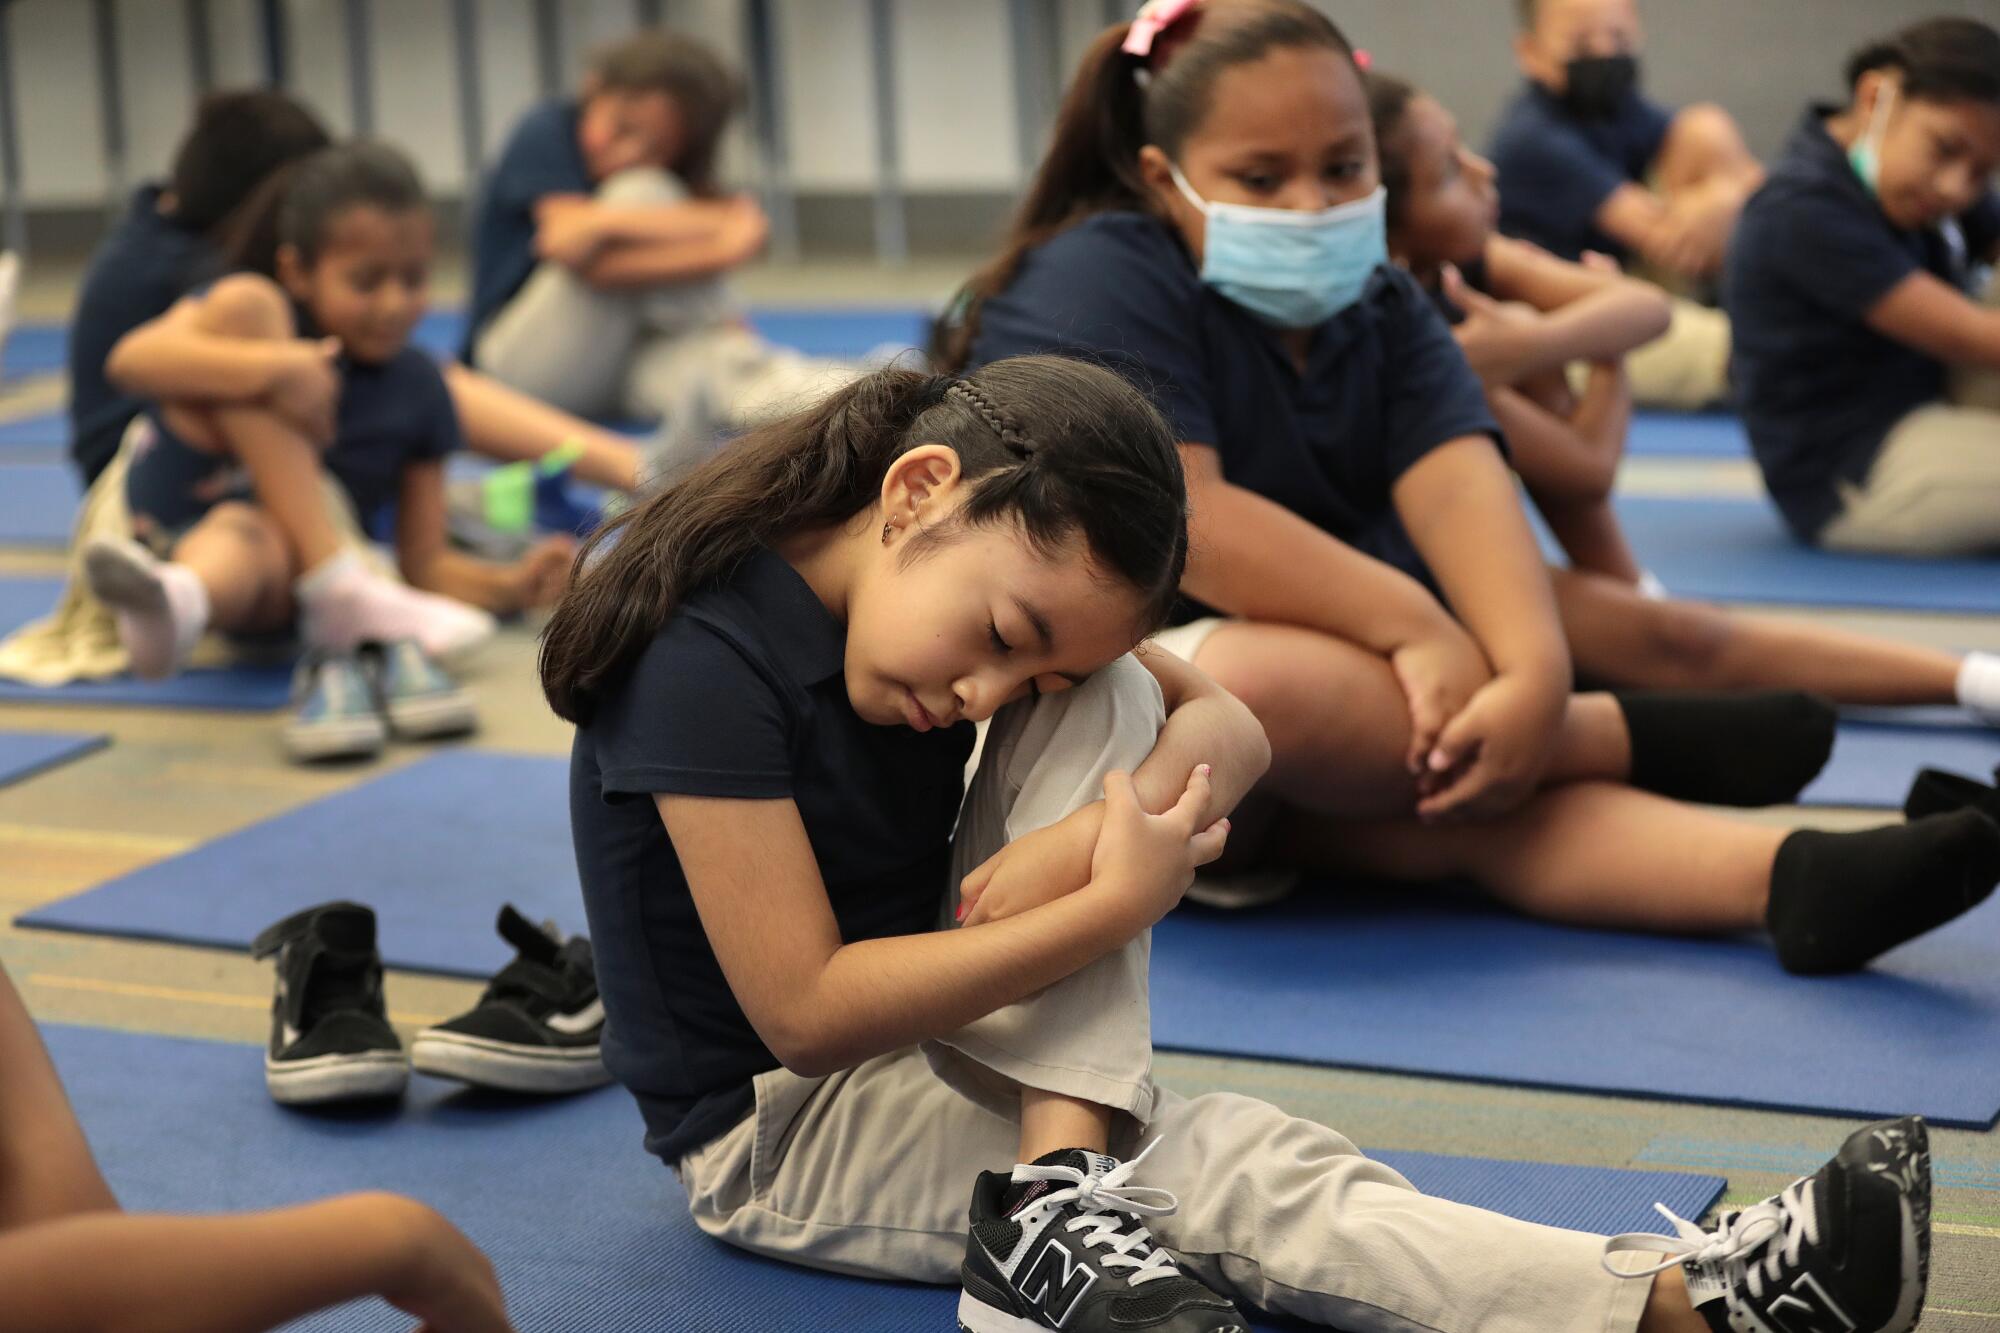 Second grade student Giselle Calderon stretches to instructions from Yoga instructors.